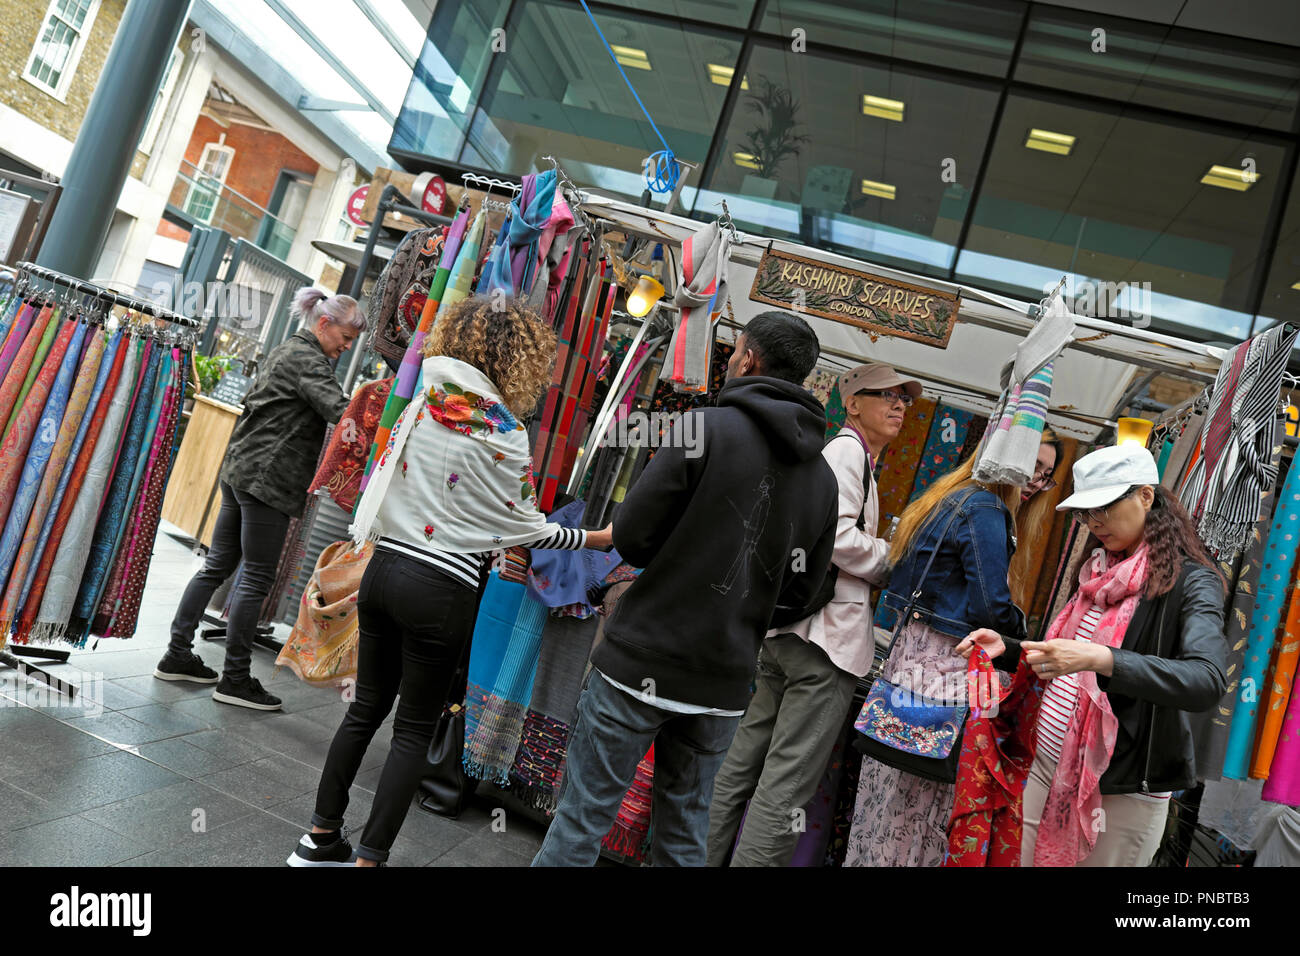 People shopping for scarves at a scarf stall "Kashimi Scarves" in Spitalfields Market near Brick Lane in East London E1 UK  KATHY DEWITT Stock Photo